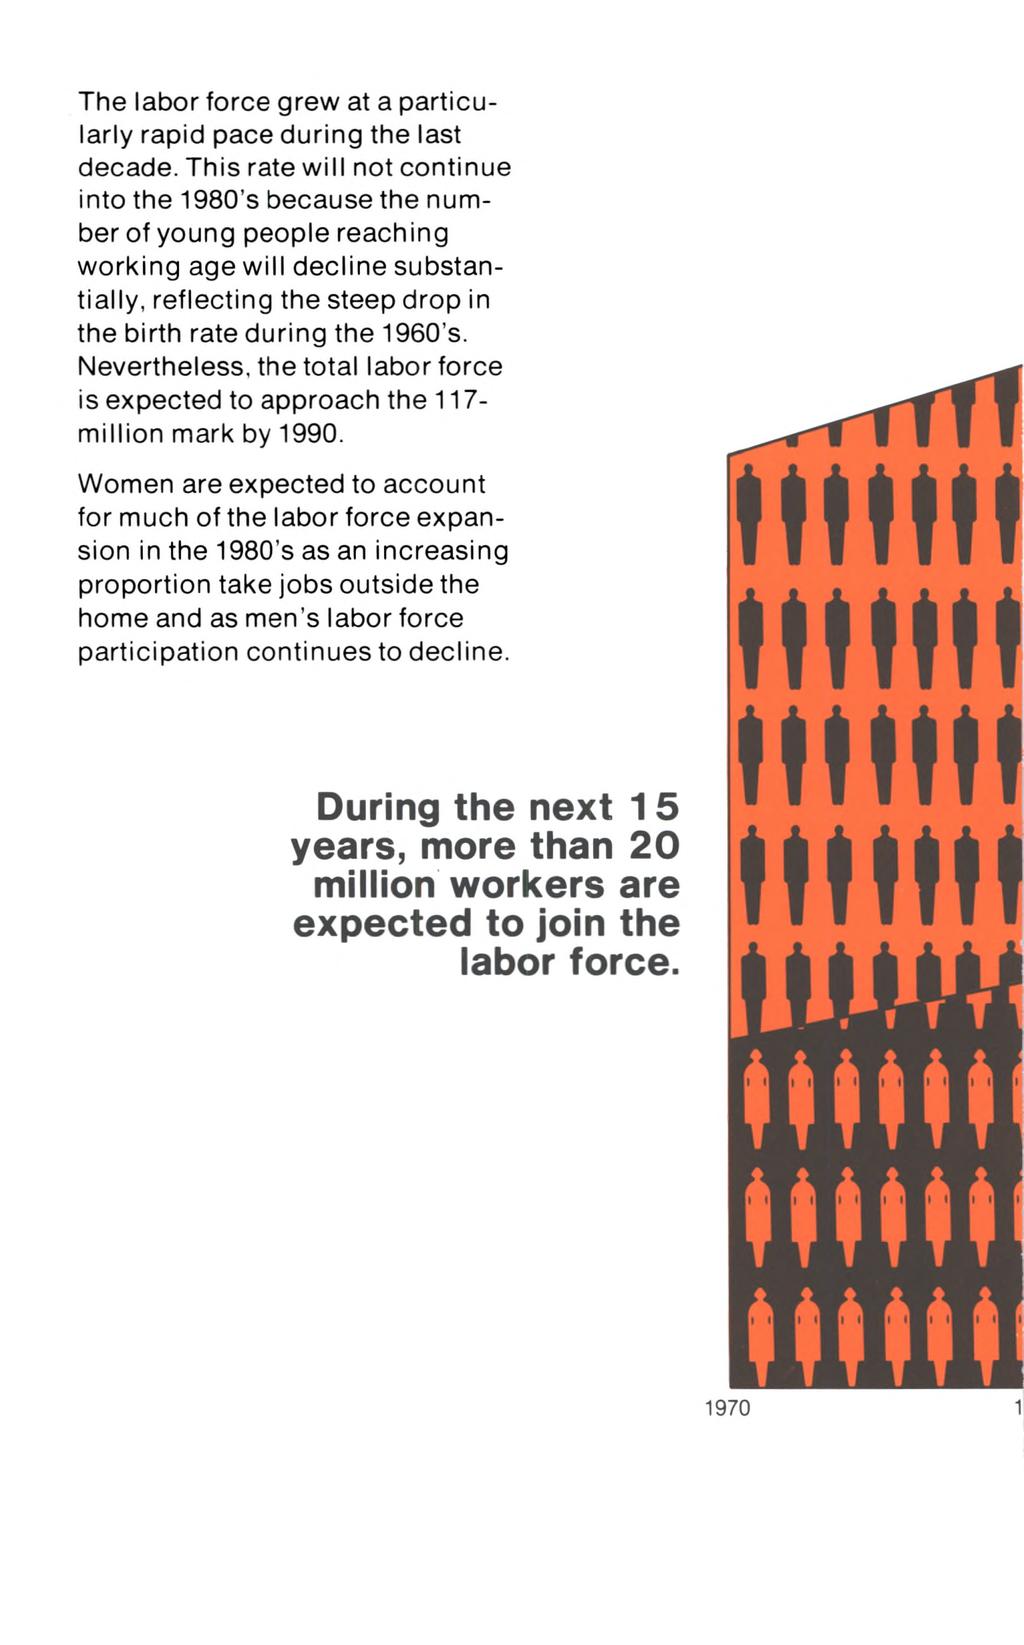 The labor force grew at a particularly rapid pace during the last decade.